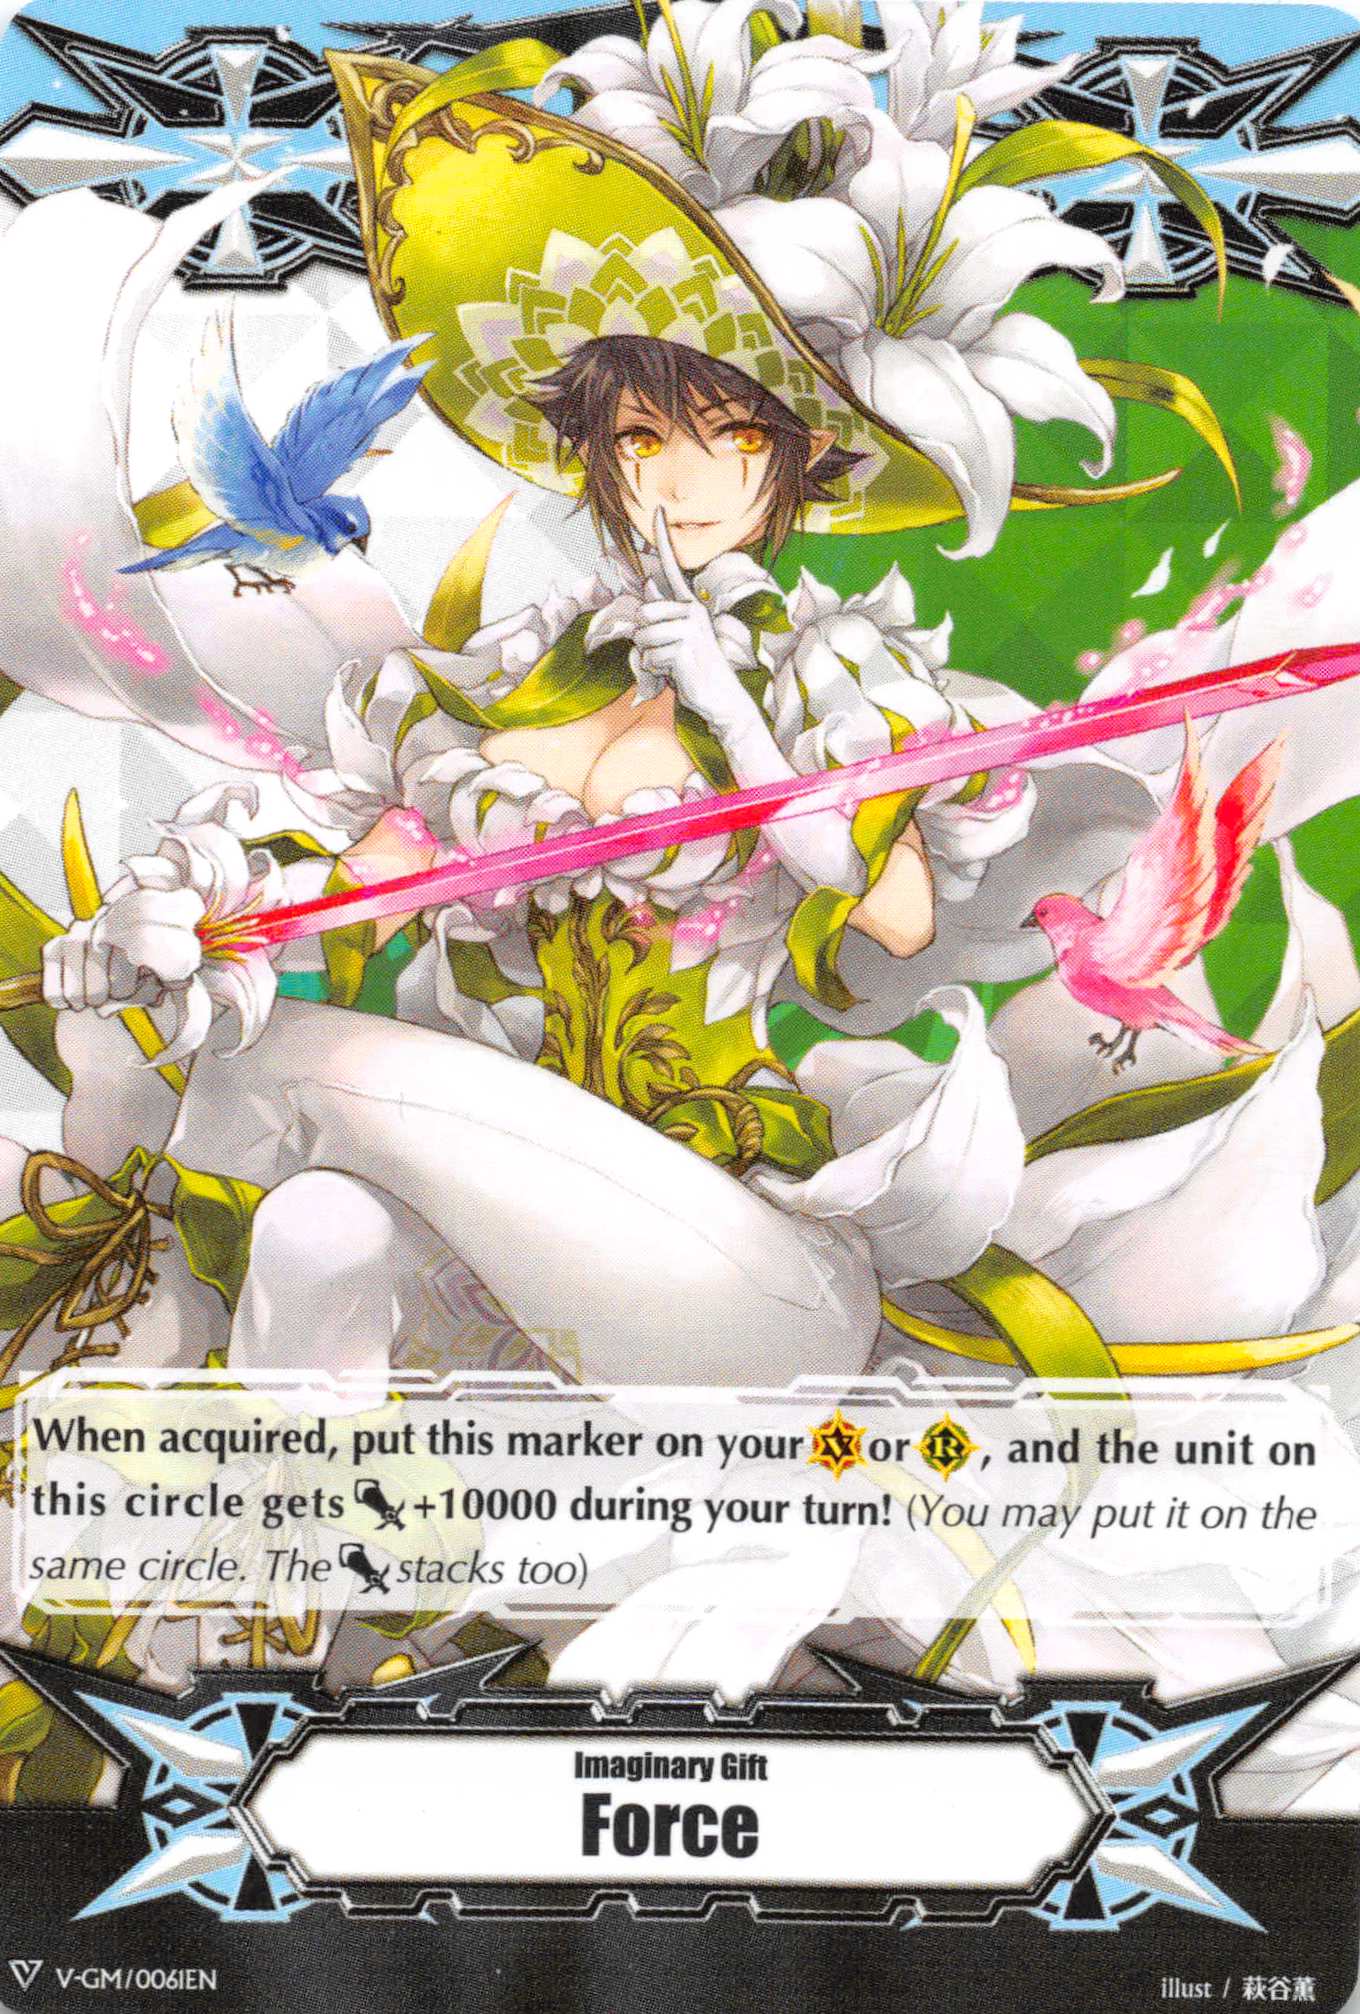 Imaginary Gift [Force] - White Lily Musketeer, Cecilia - Duel Kingdom